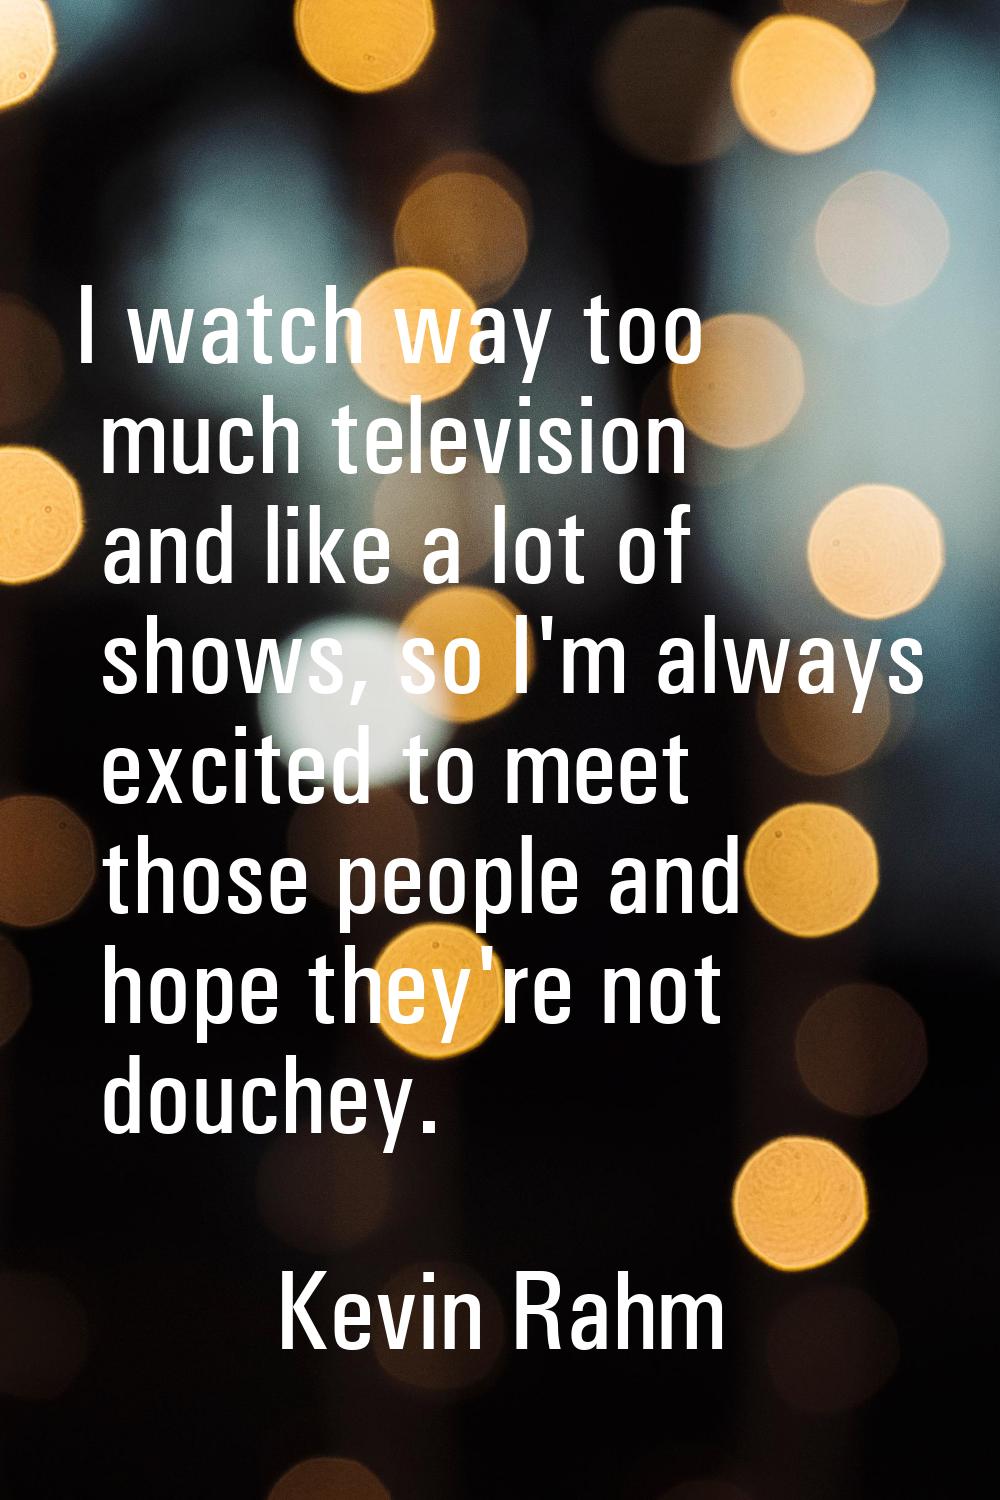 I watch way too much television and like a lot of shows, so I'm always excited to meet those people